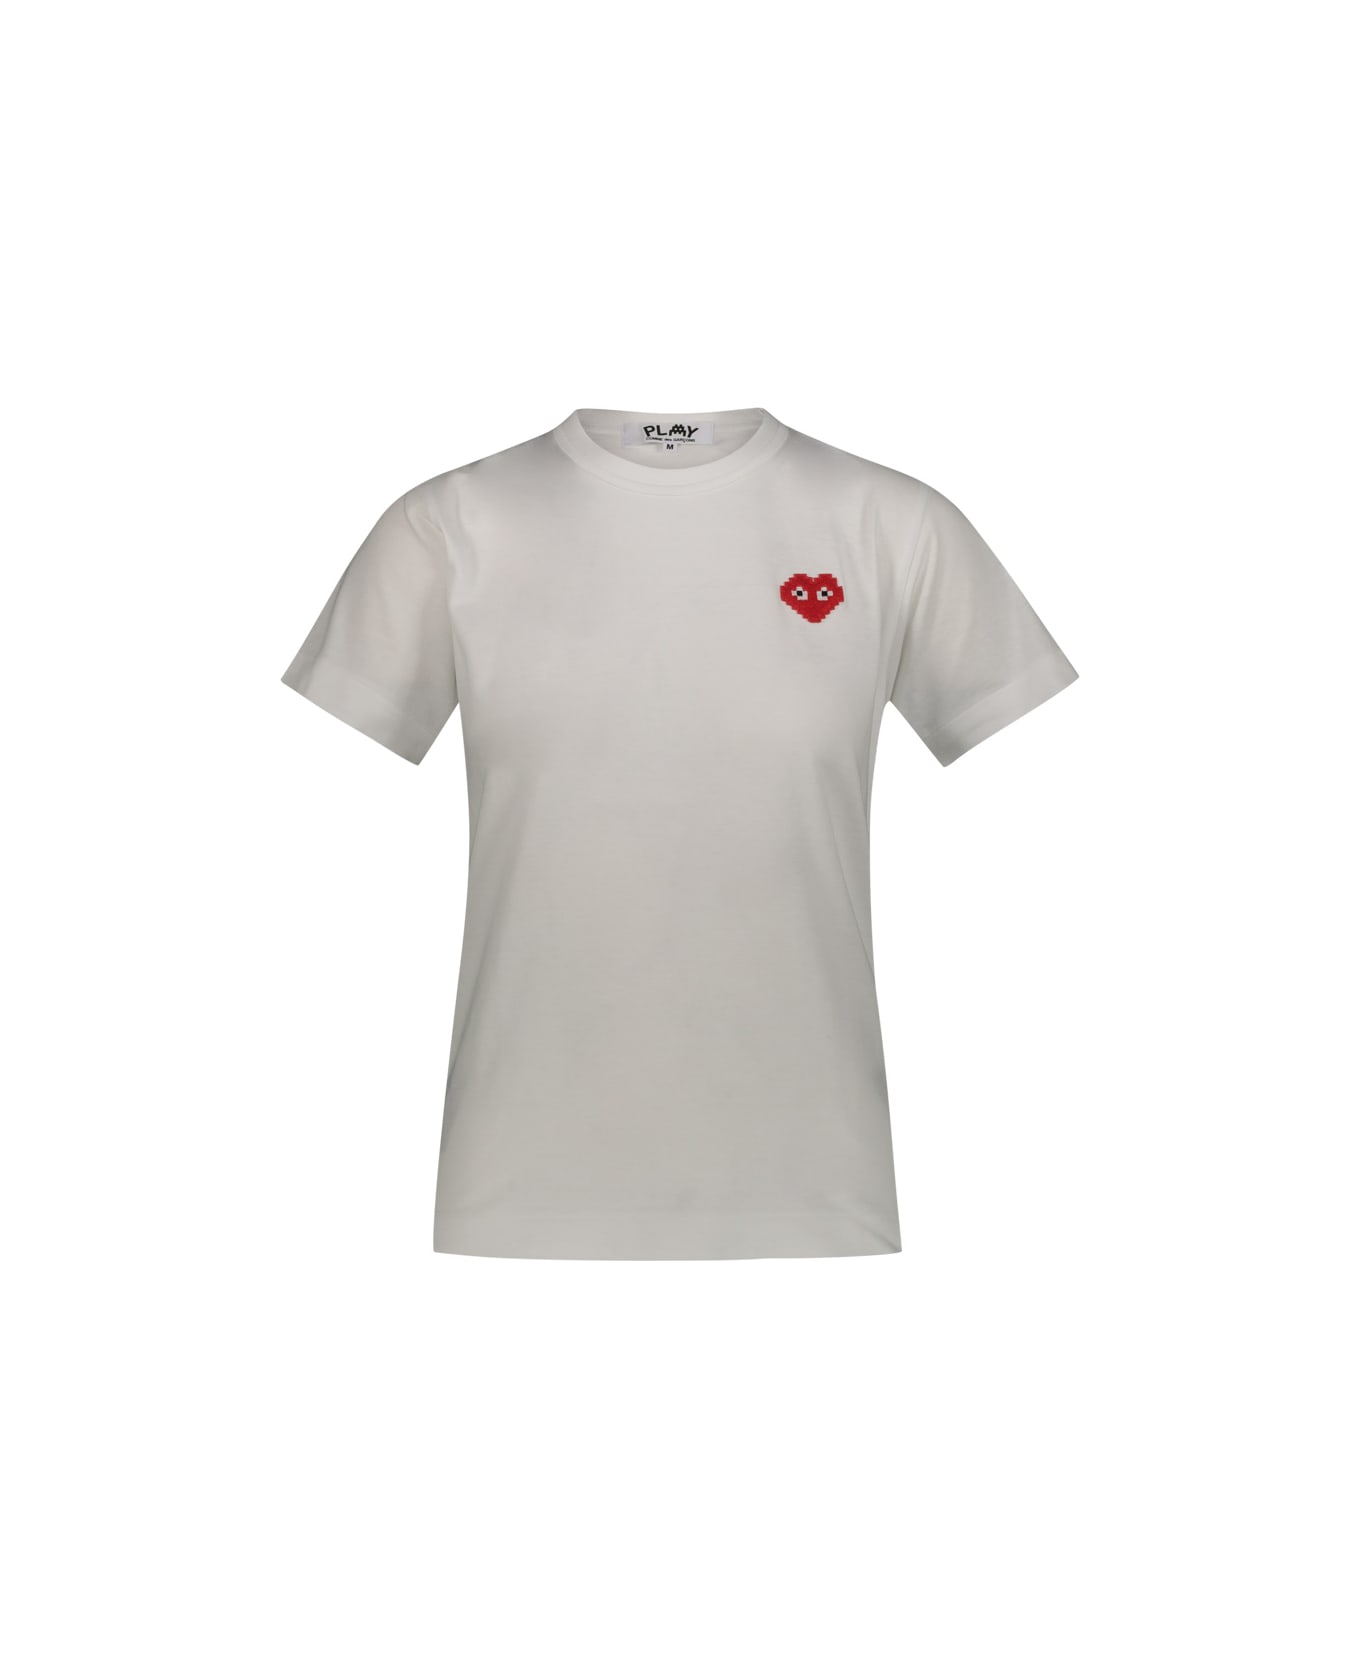 Comme des Garçons Play T-shirt With Red Pixelated Heart - White Tシャツ